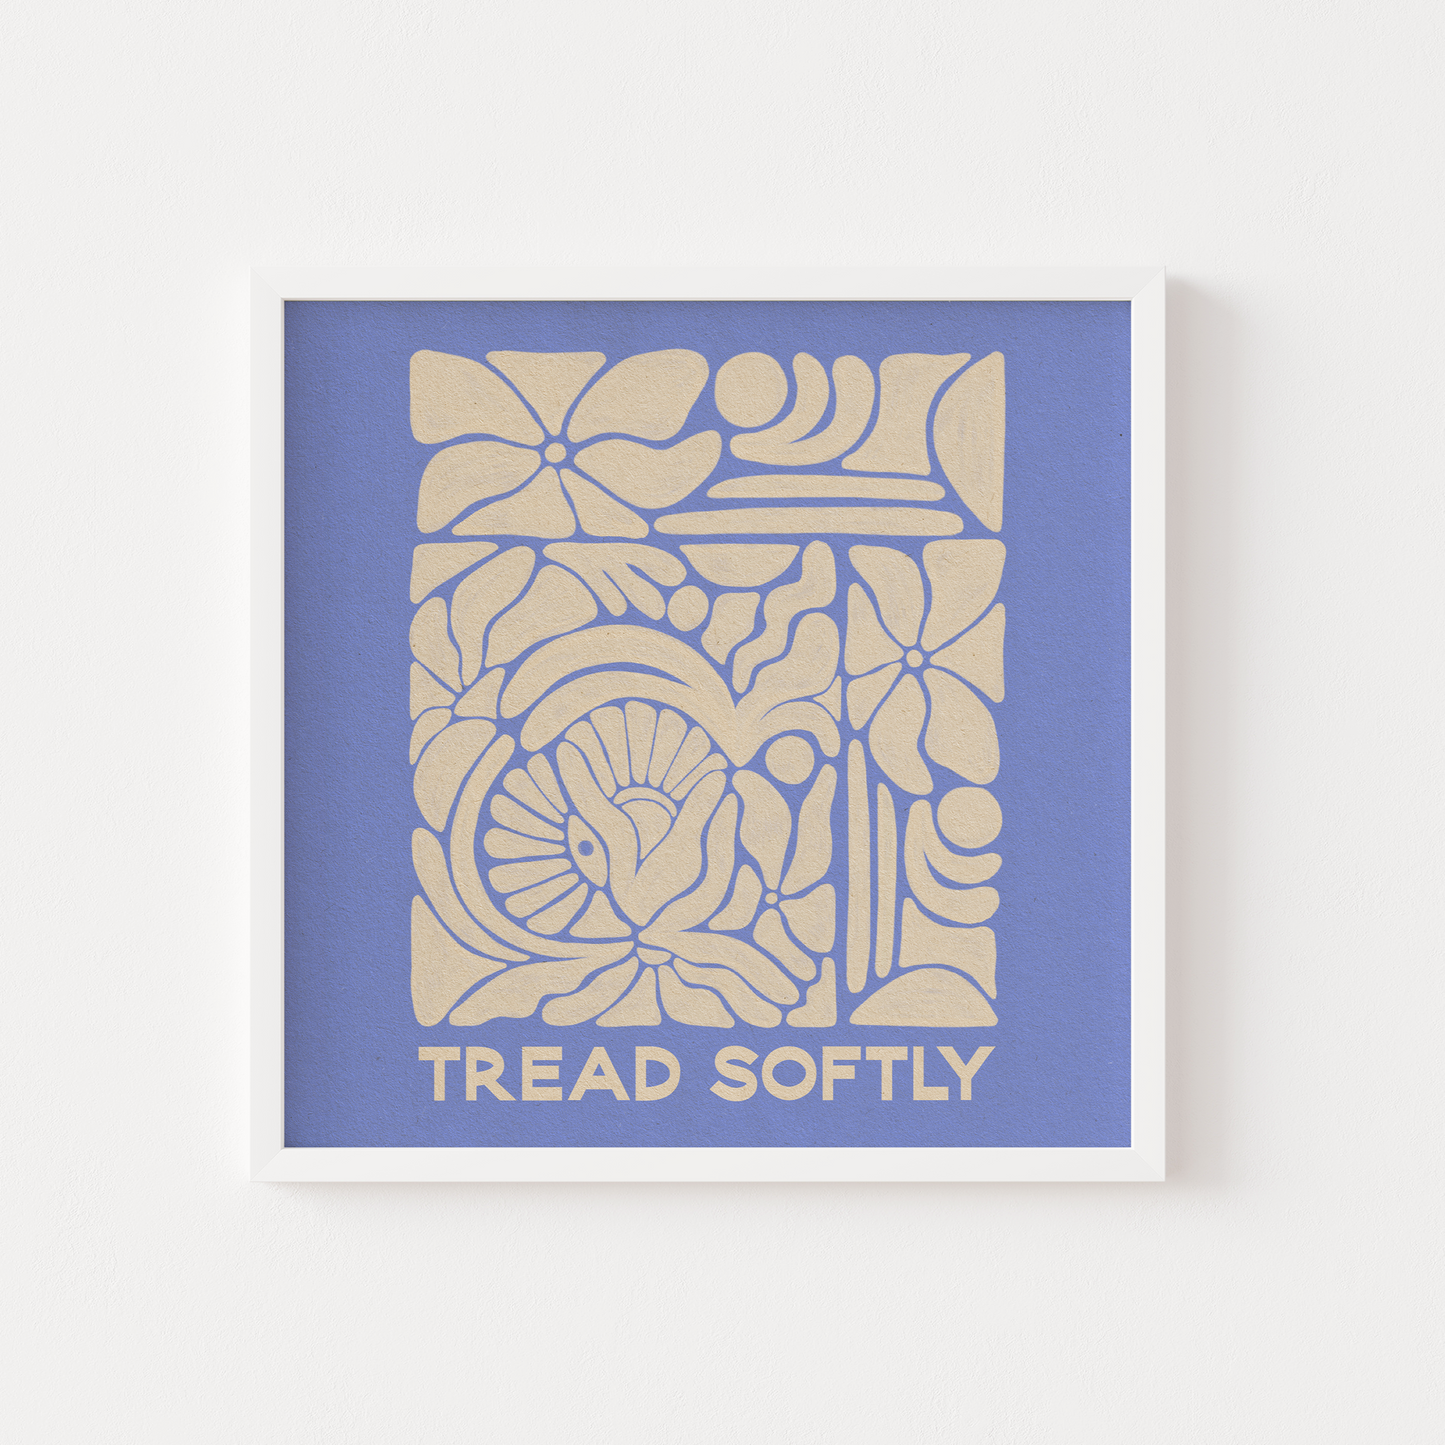 Image reads "Tread Softly" with abstract shapes & florals surrounding above.